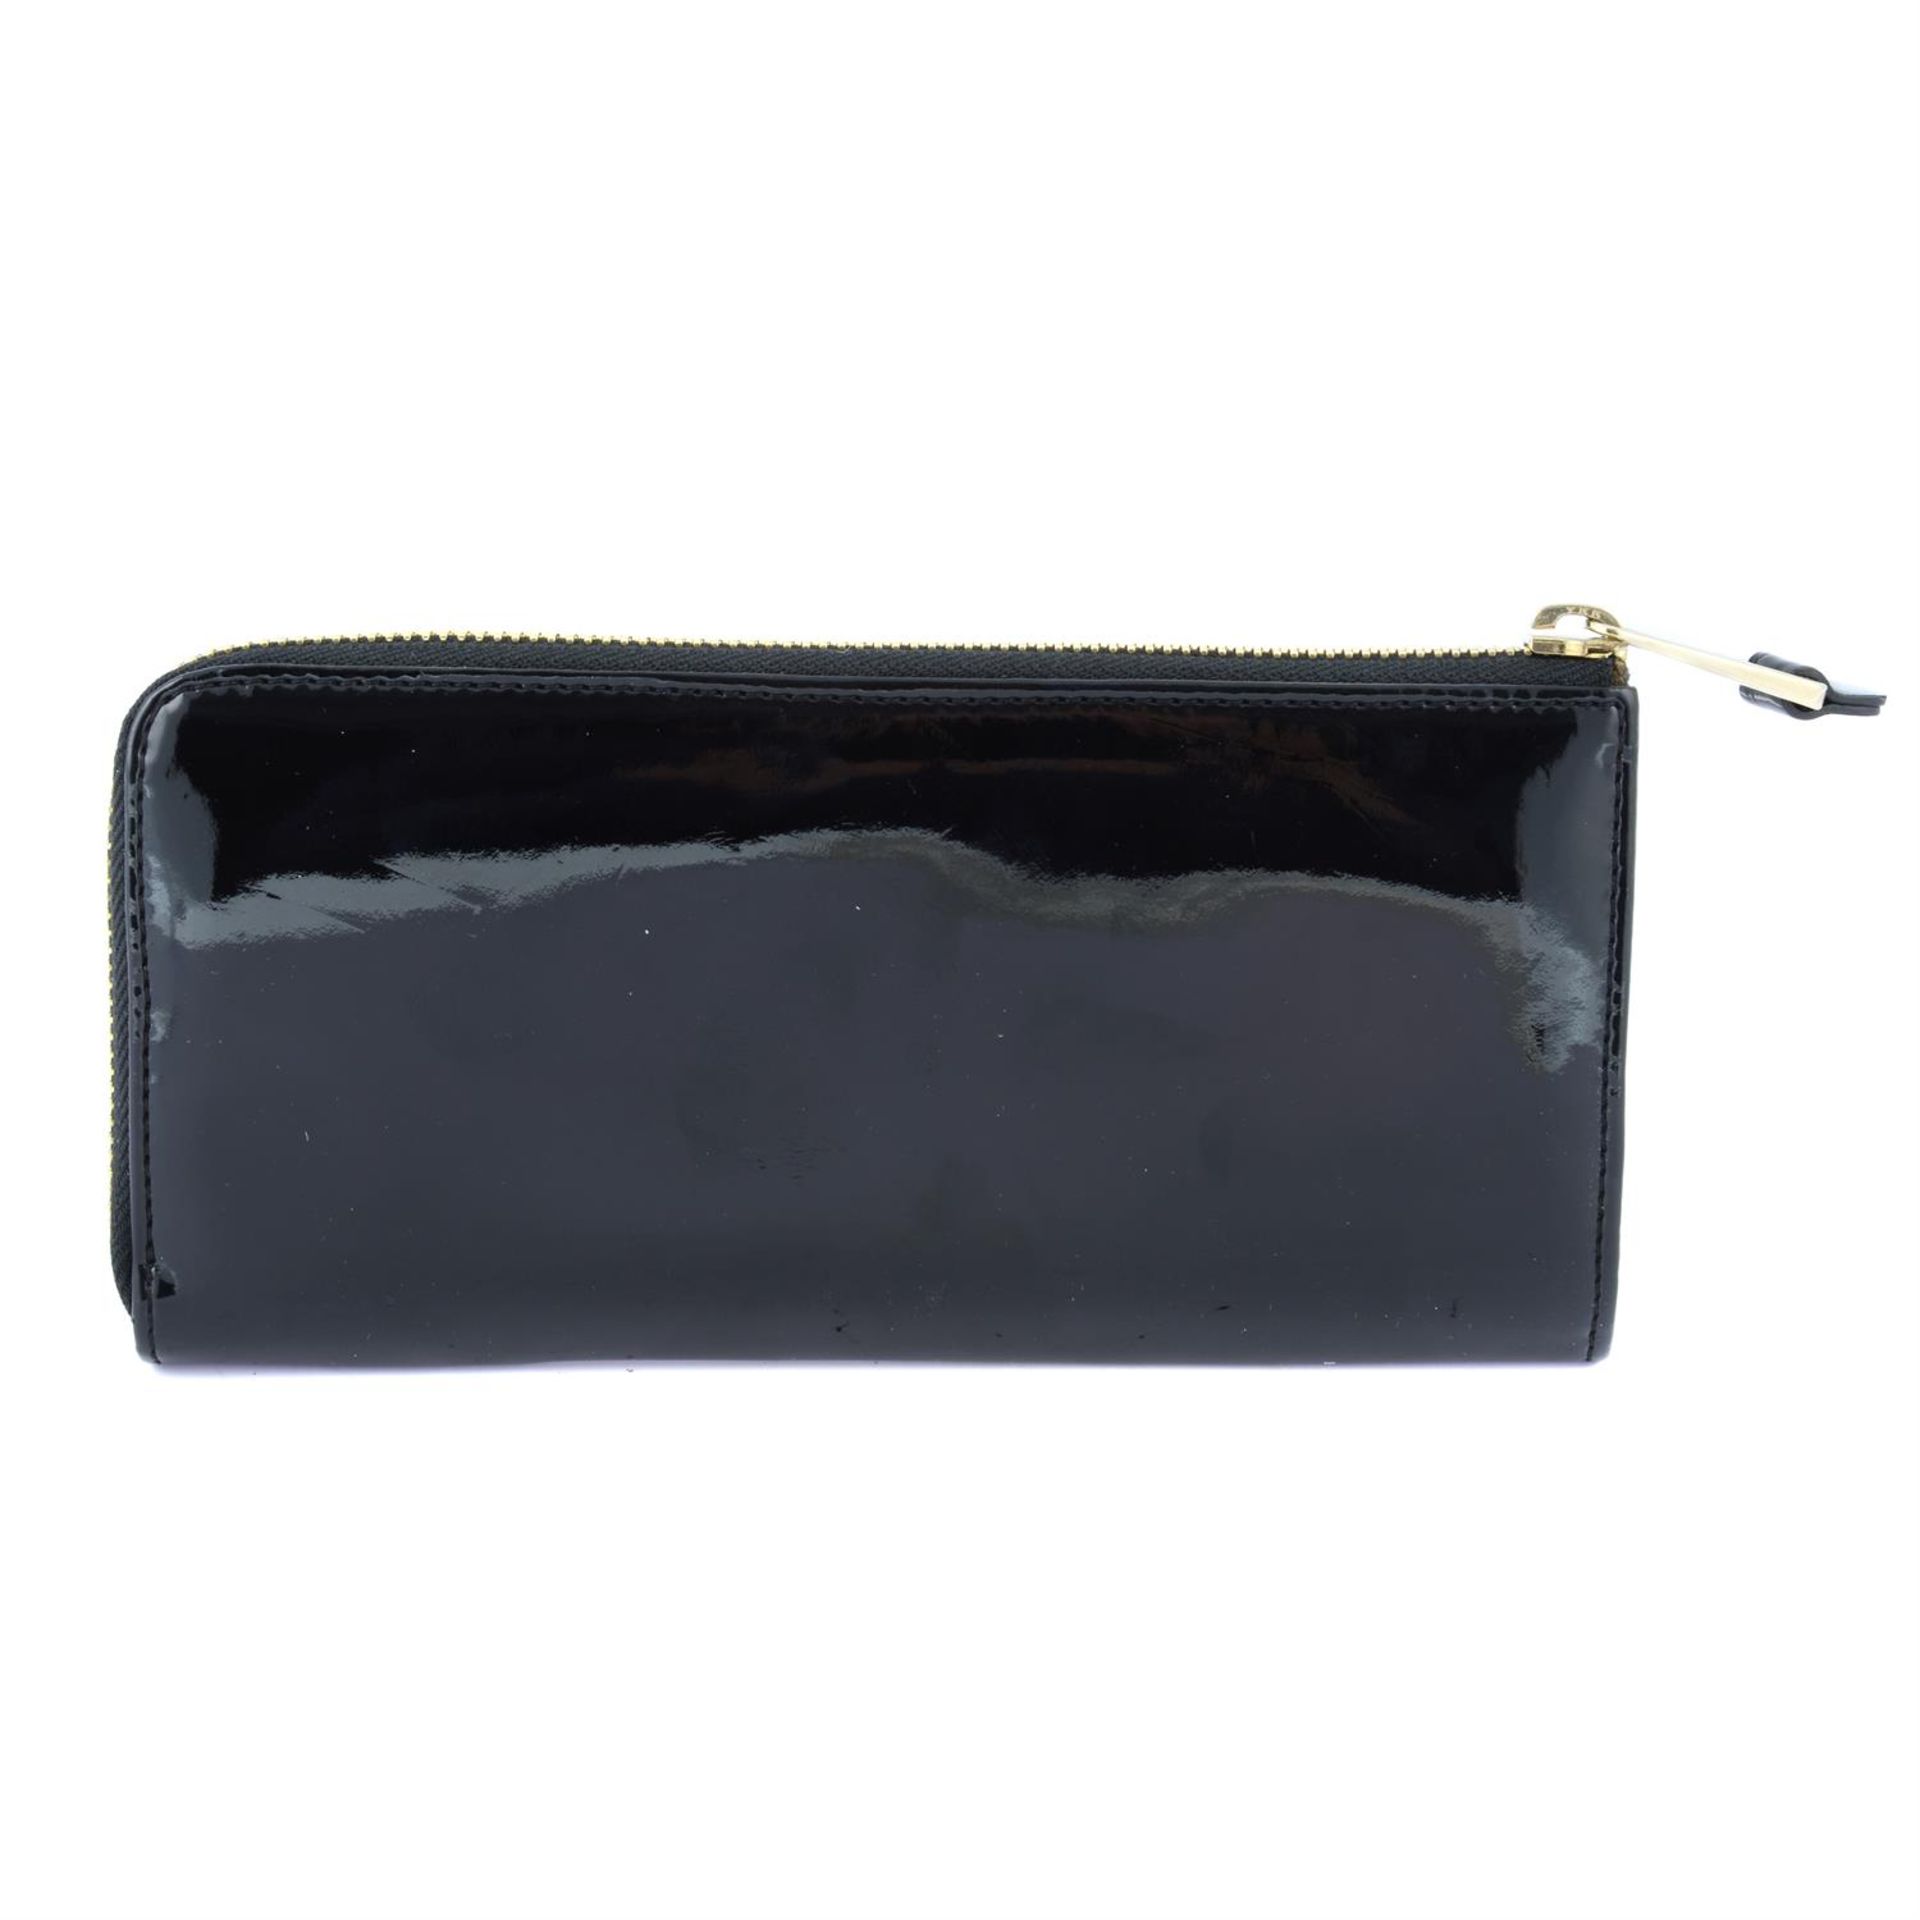 ARMANI - a black patent leather wallet. - Image 2 of 4